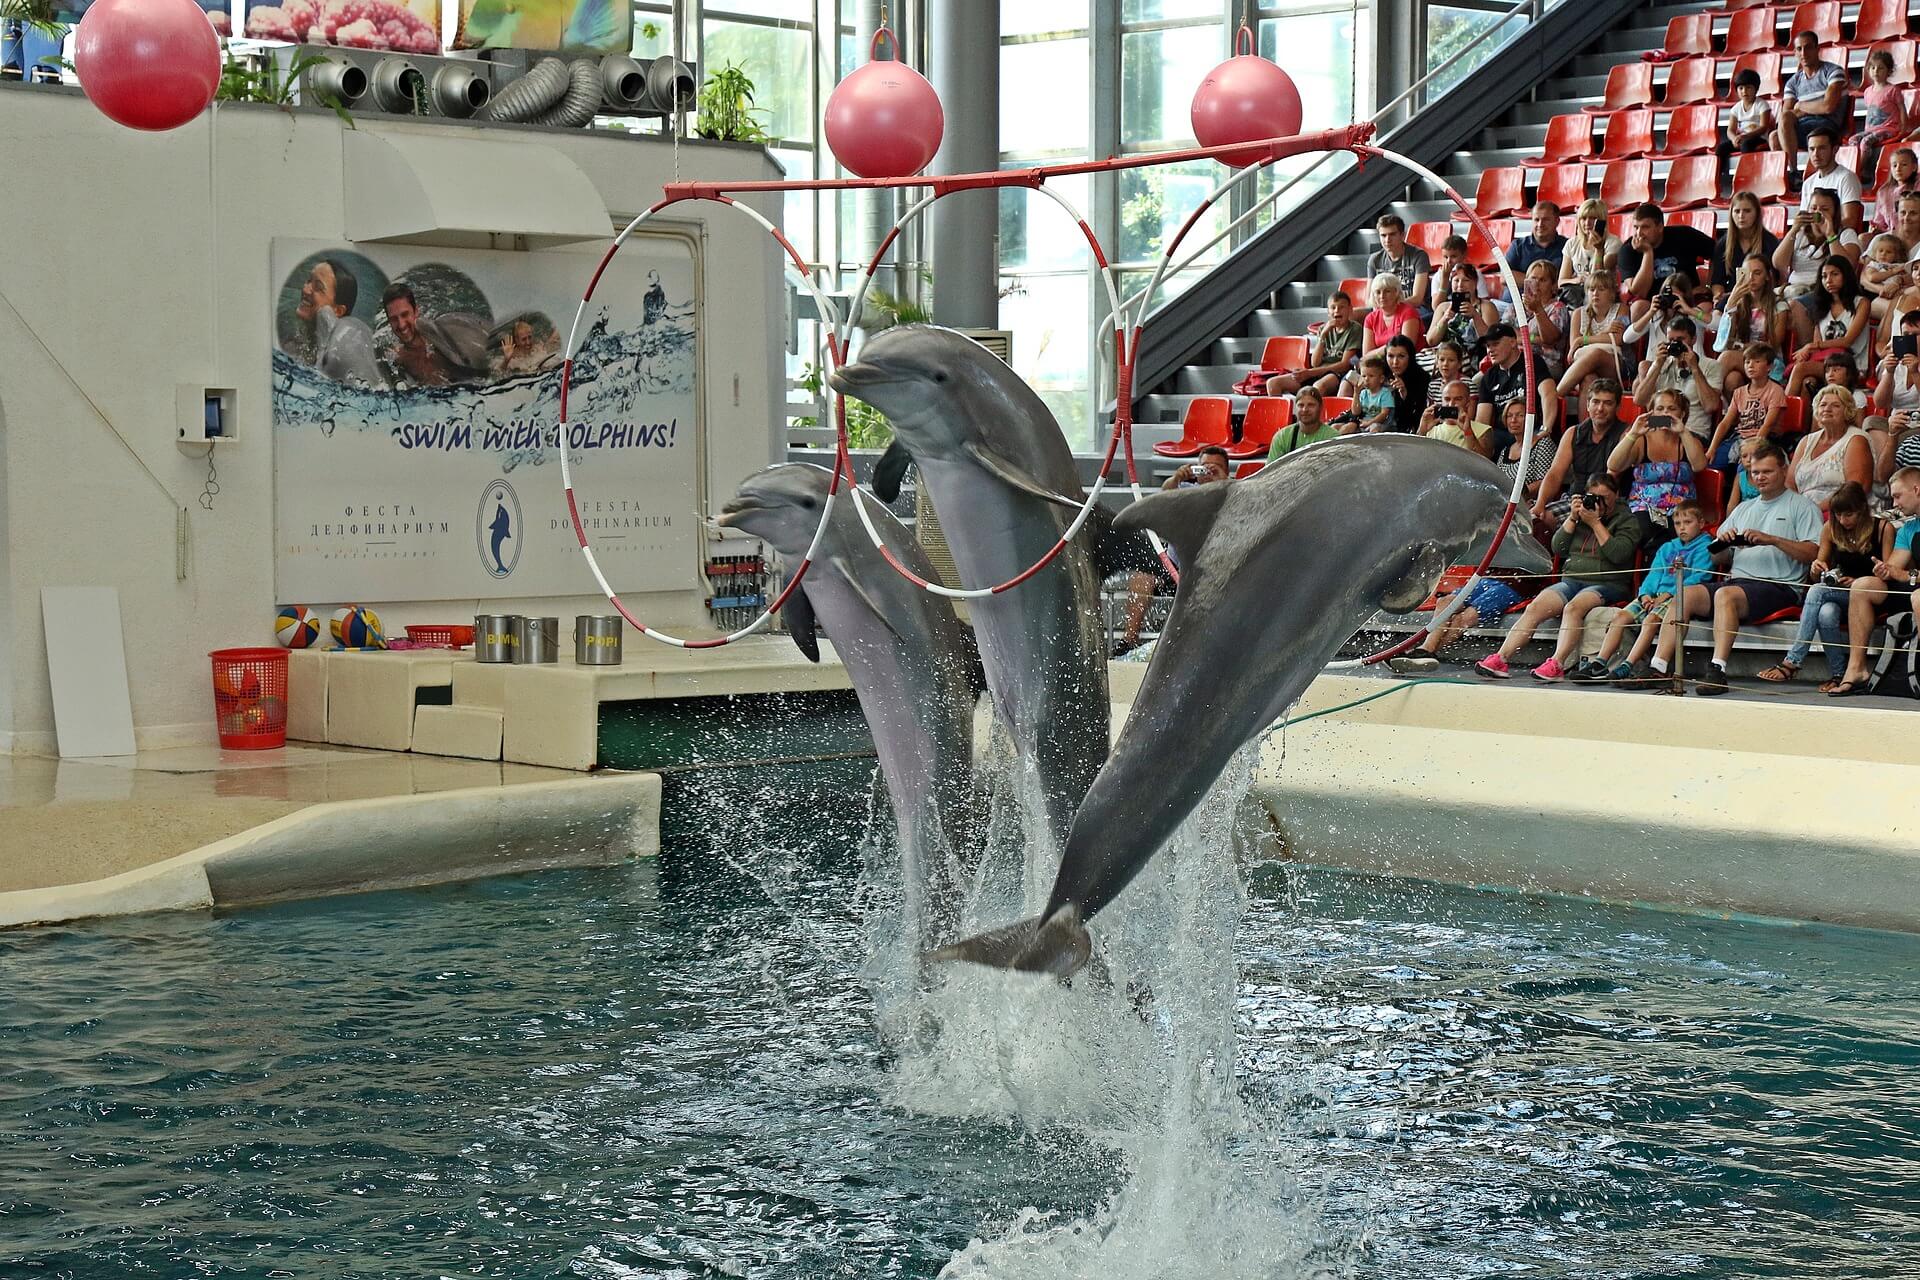 Victory! Traveling Dolphin Circus Shows Are Now Banned in Indonesia